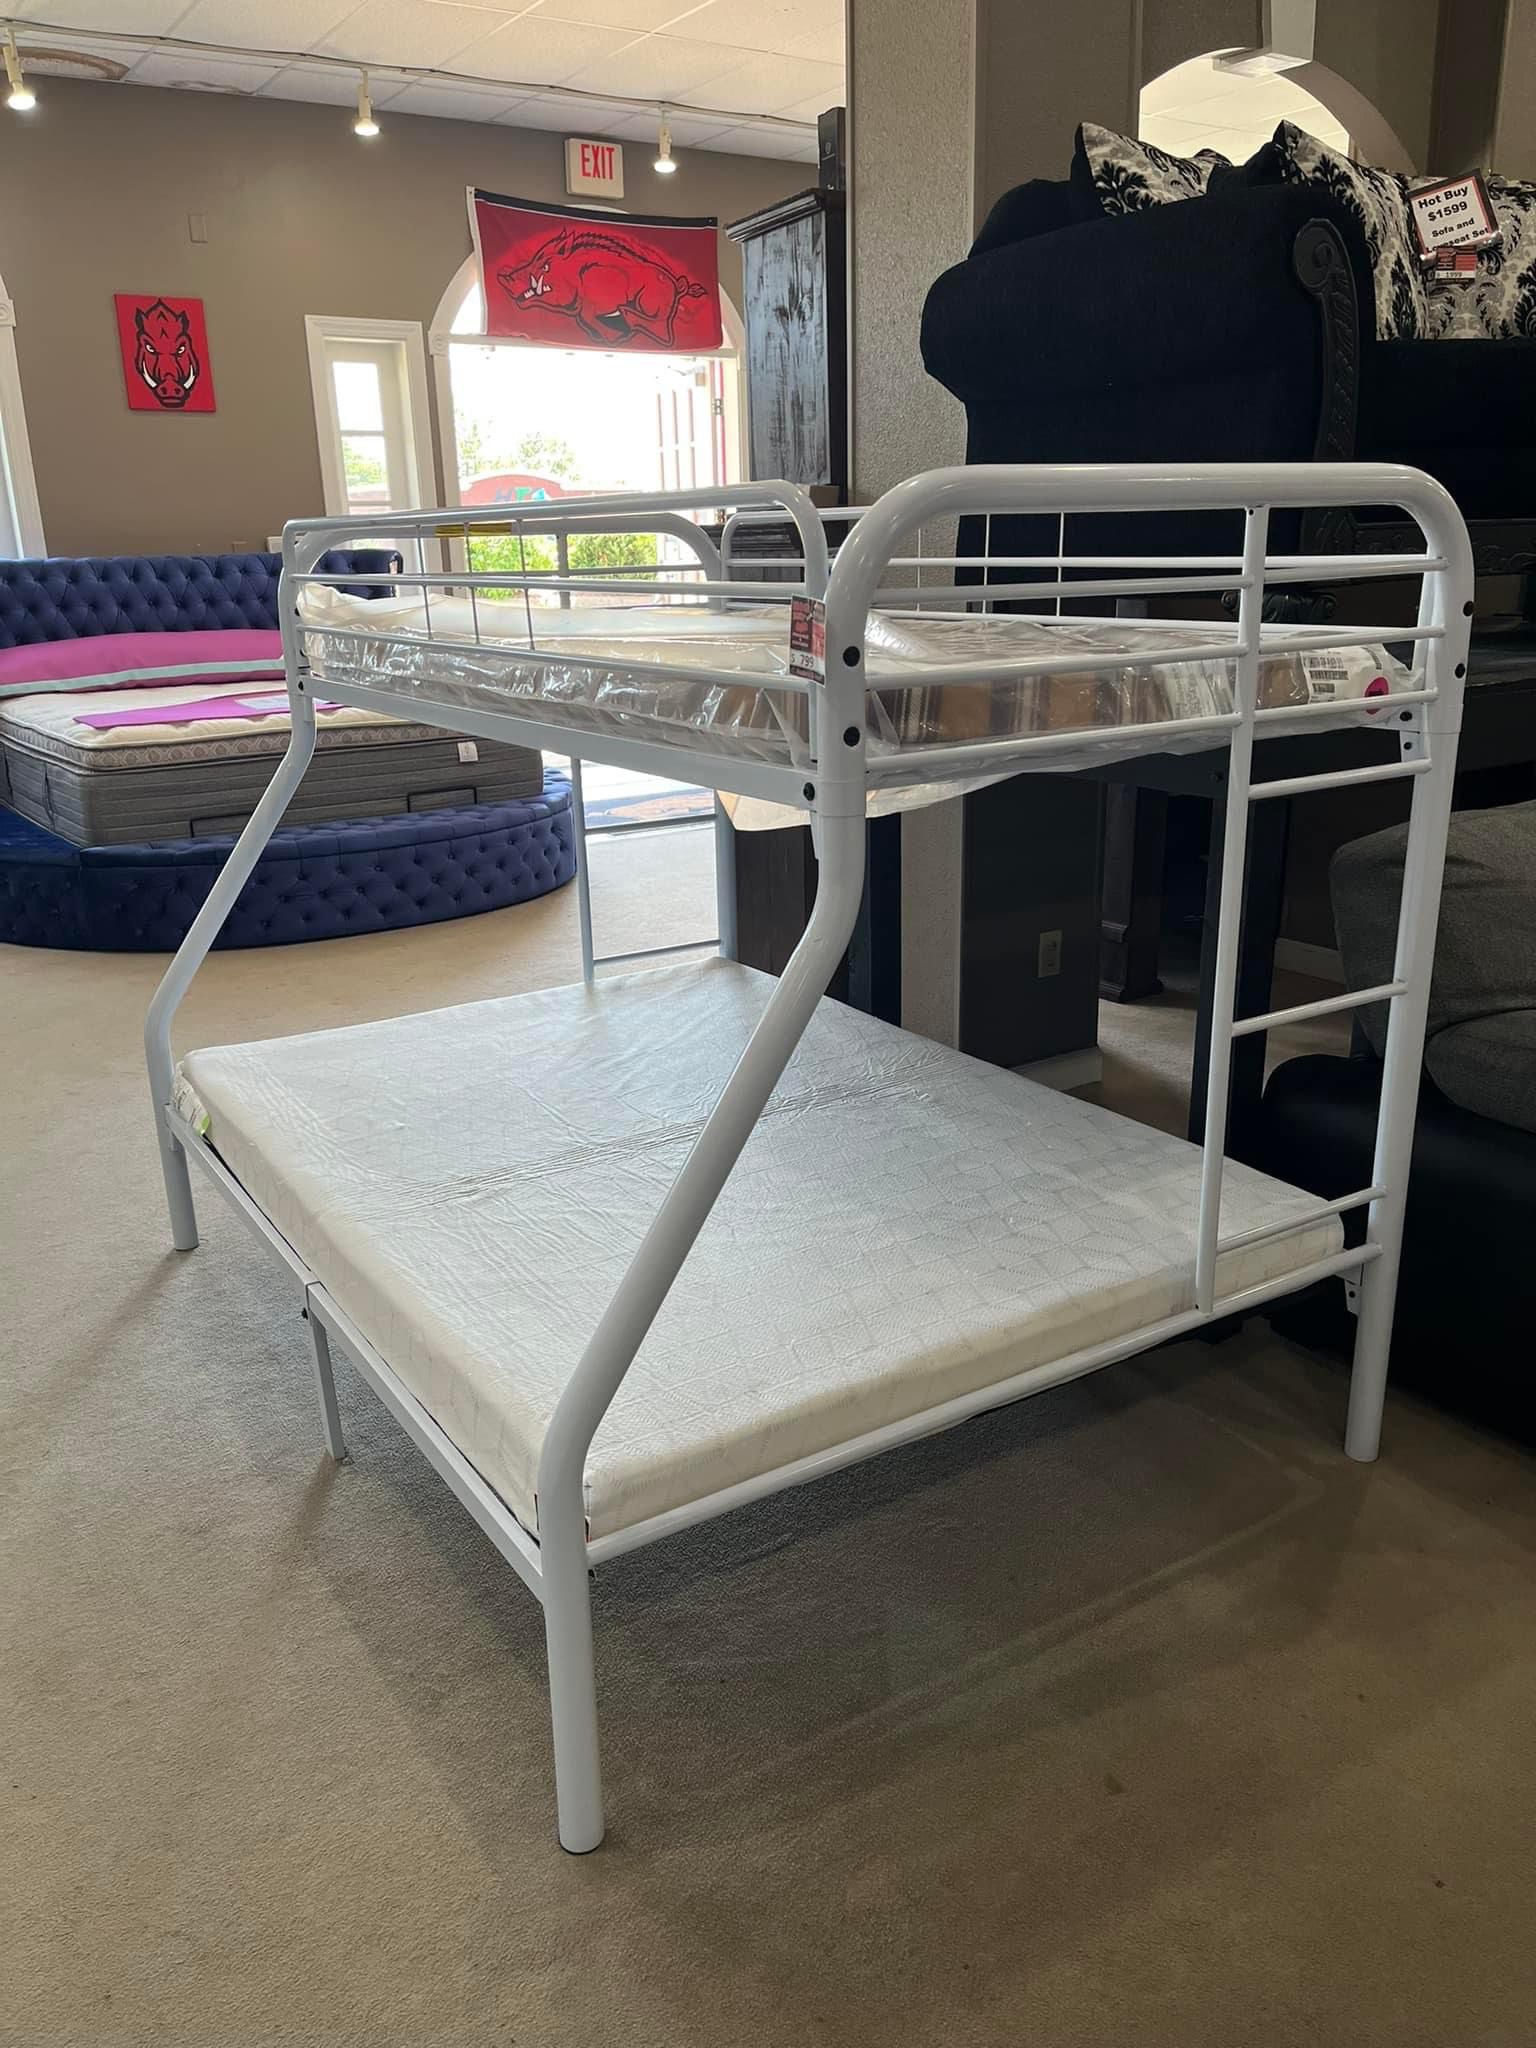 Bunk Bed Blow out Sales Going On Now!! 